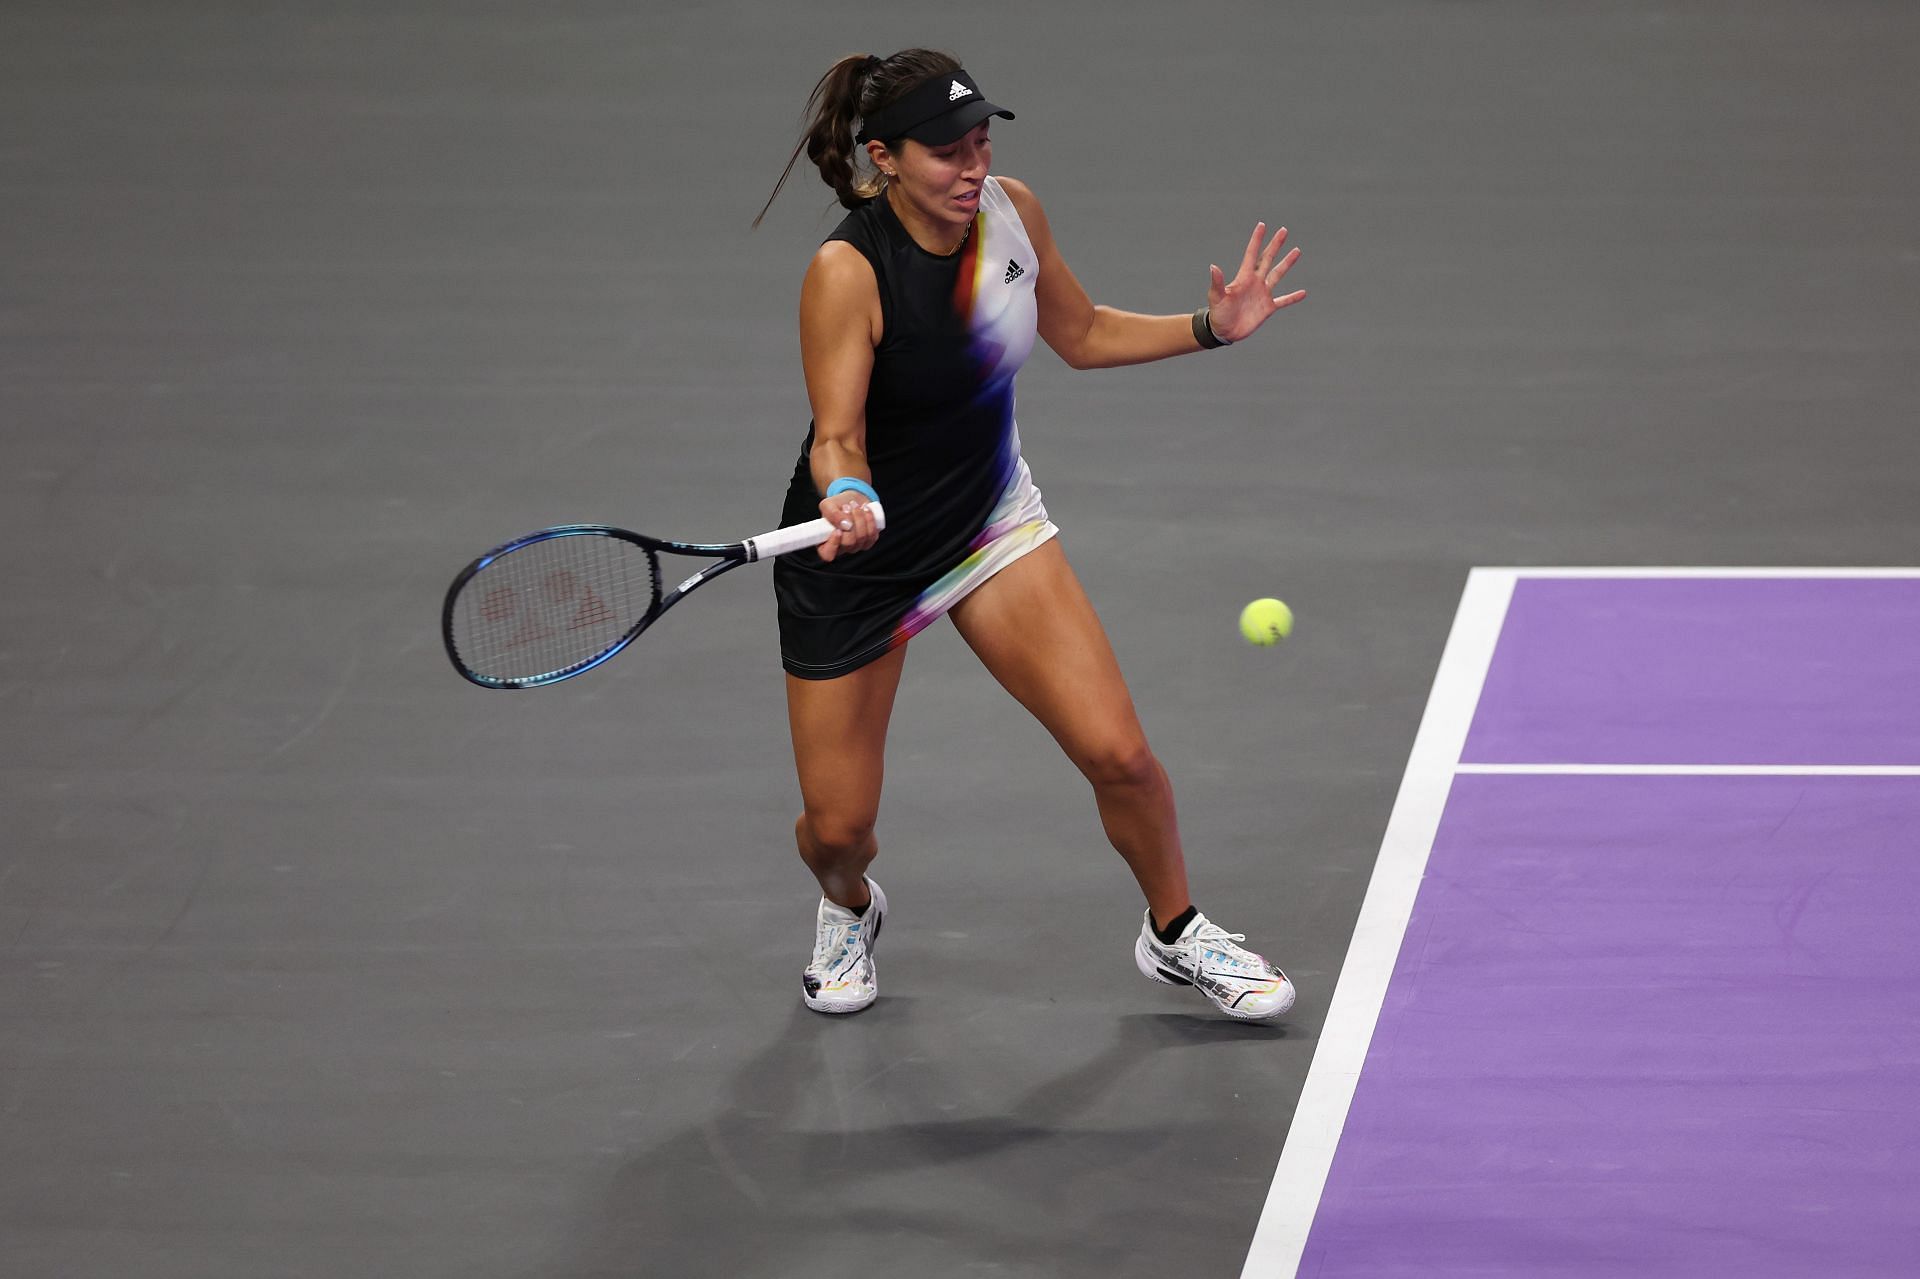 WTA Finals 2022 Schedule Today TV Schedule, start time, order of play